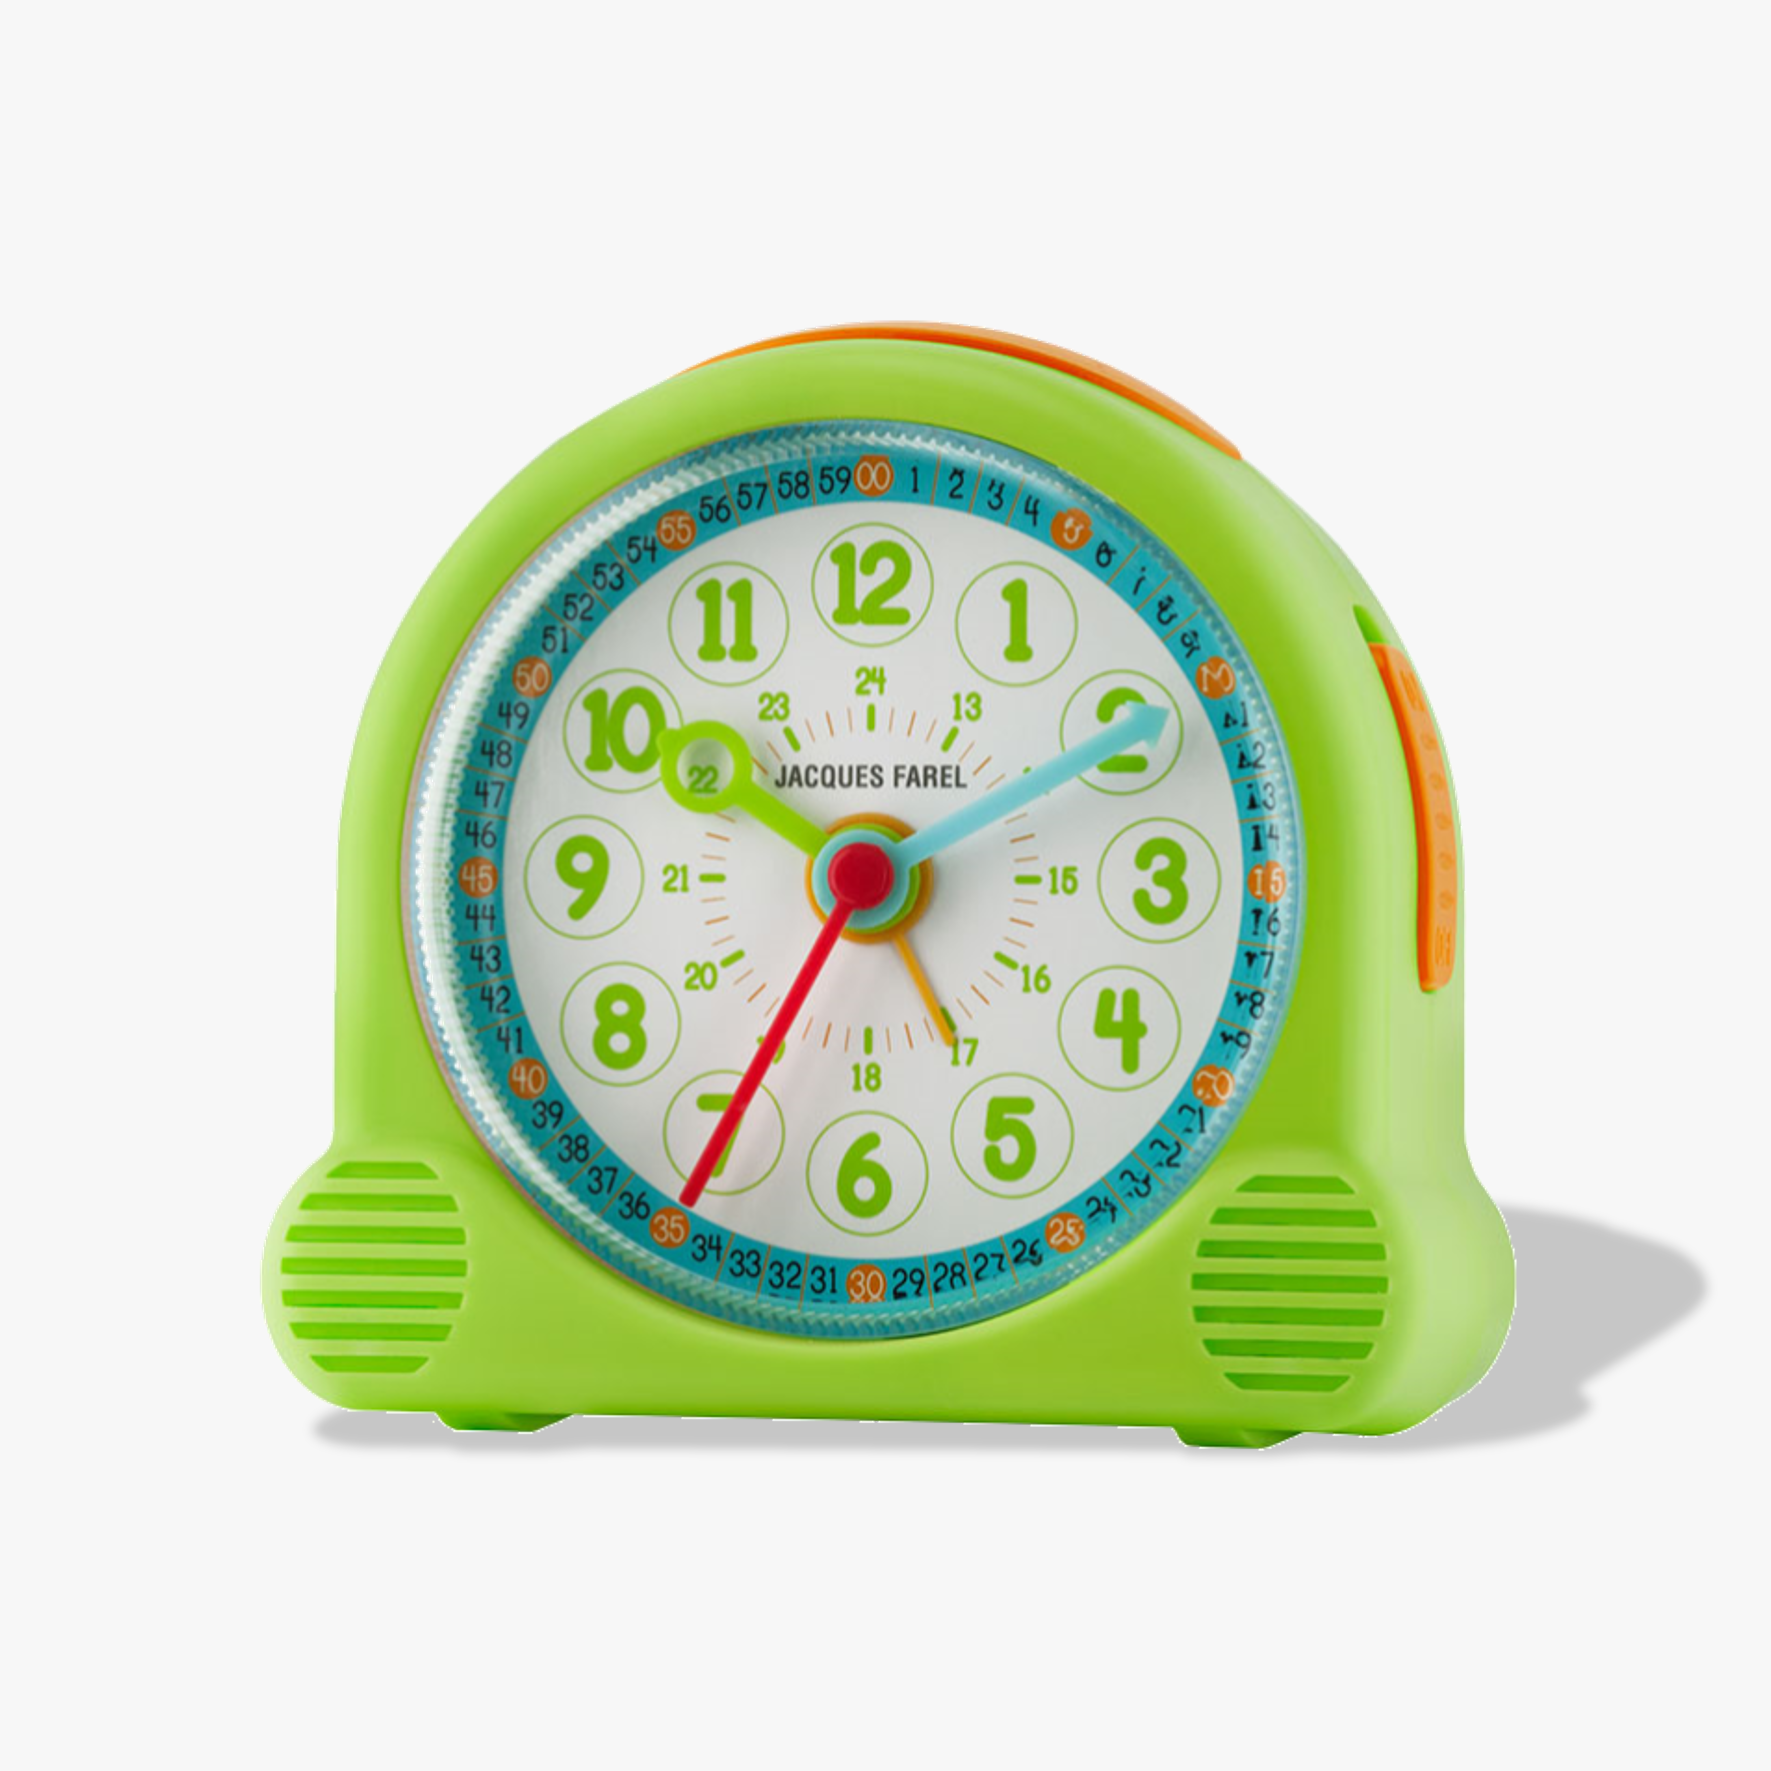 ACL02 children's alarm clock green for beginners